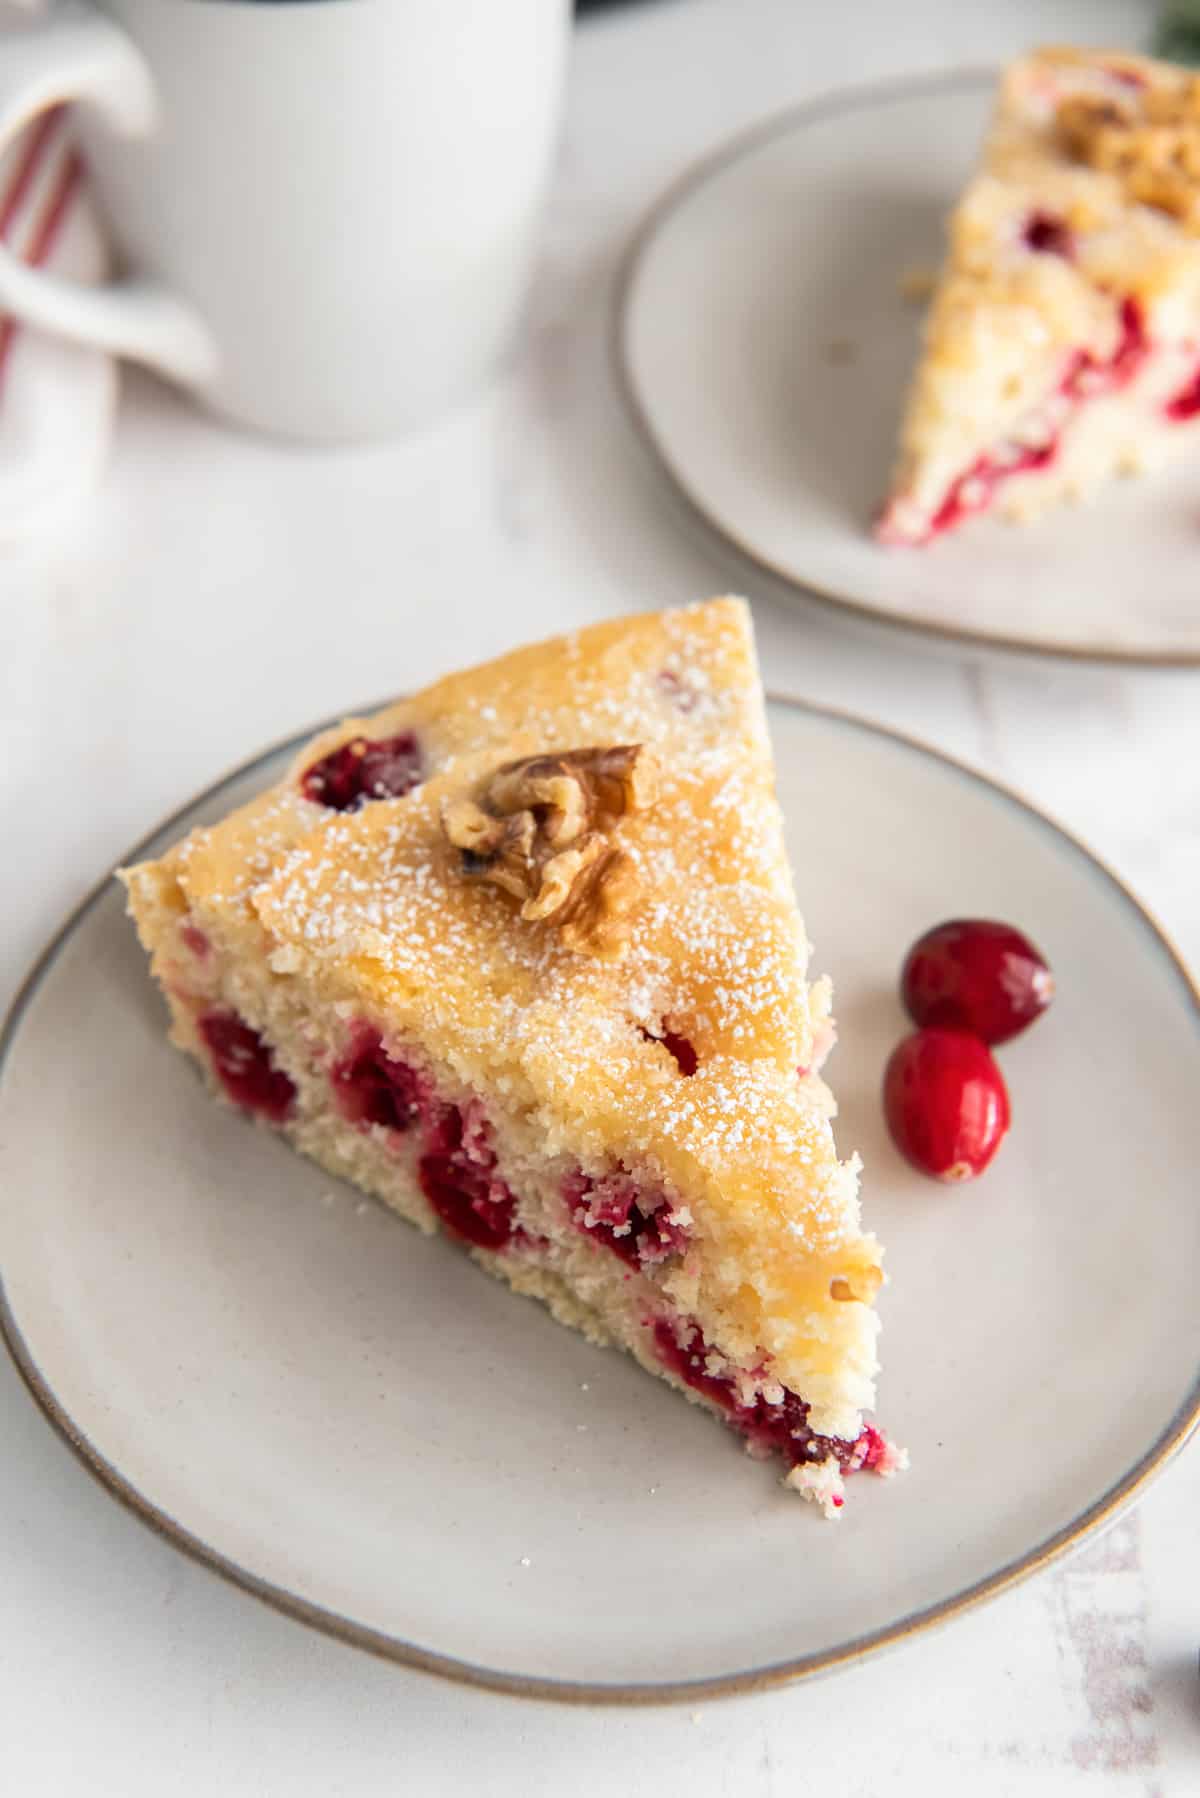 A slice of cranberry cake on a plate with fresh cranberries.